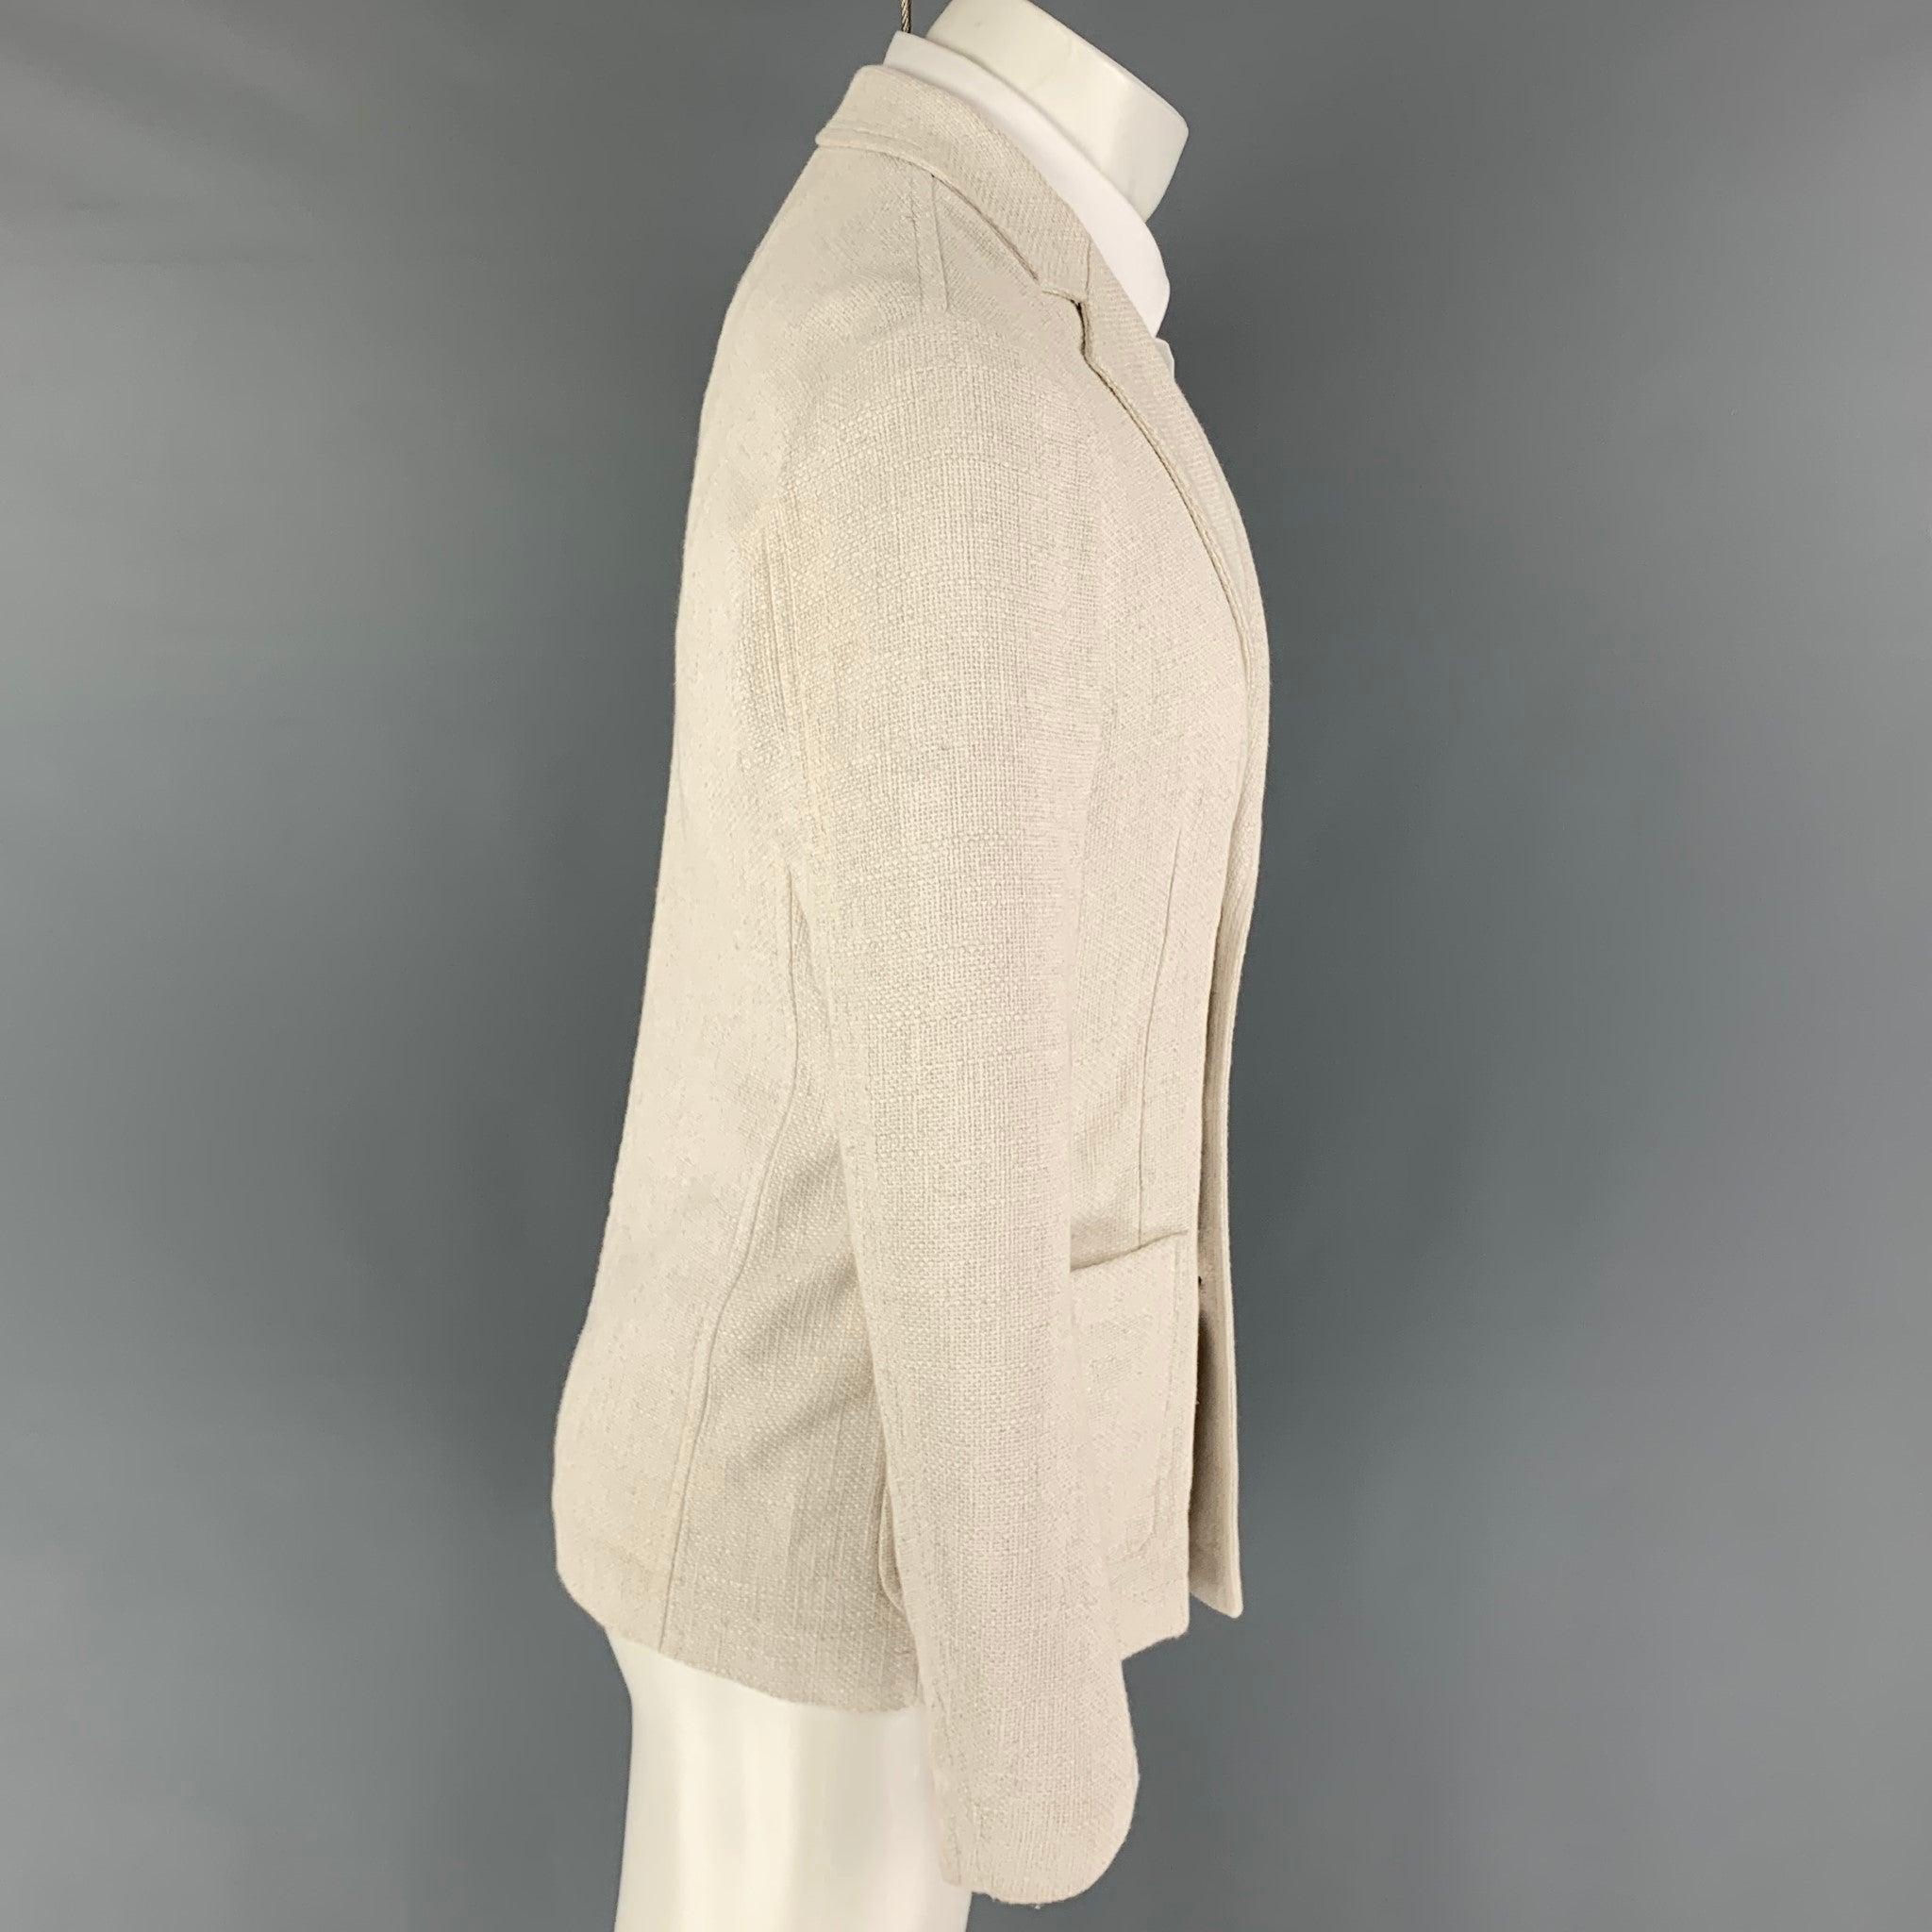 GIORGIO ARMANI sport coat comes in a off white woven viscose blend featuring a notch lapel, patch pockets, and a double breasted closure. Made in Italy.
Excellent
Pre-Owned Condition. 

Marked:   46 

Measurements: 
 
Shoulder: 17 inches Chest: 36